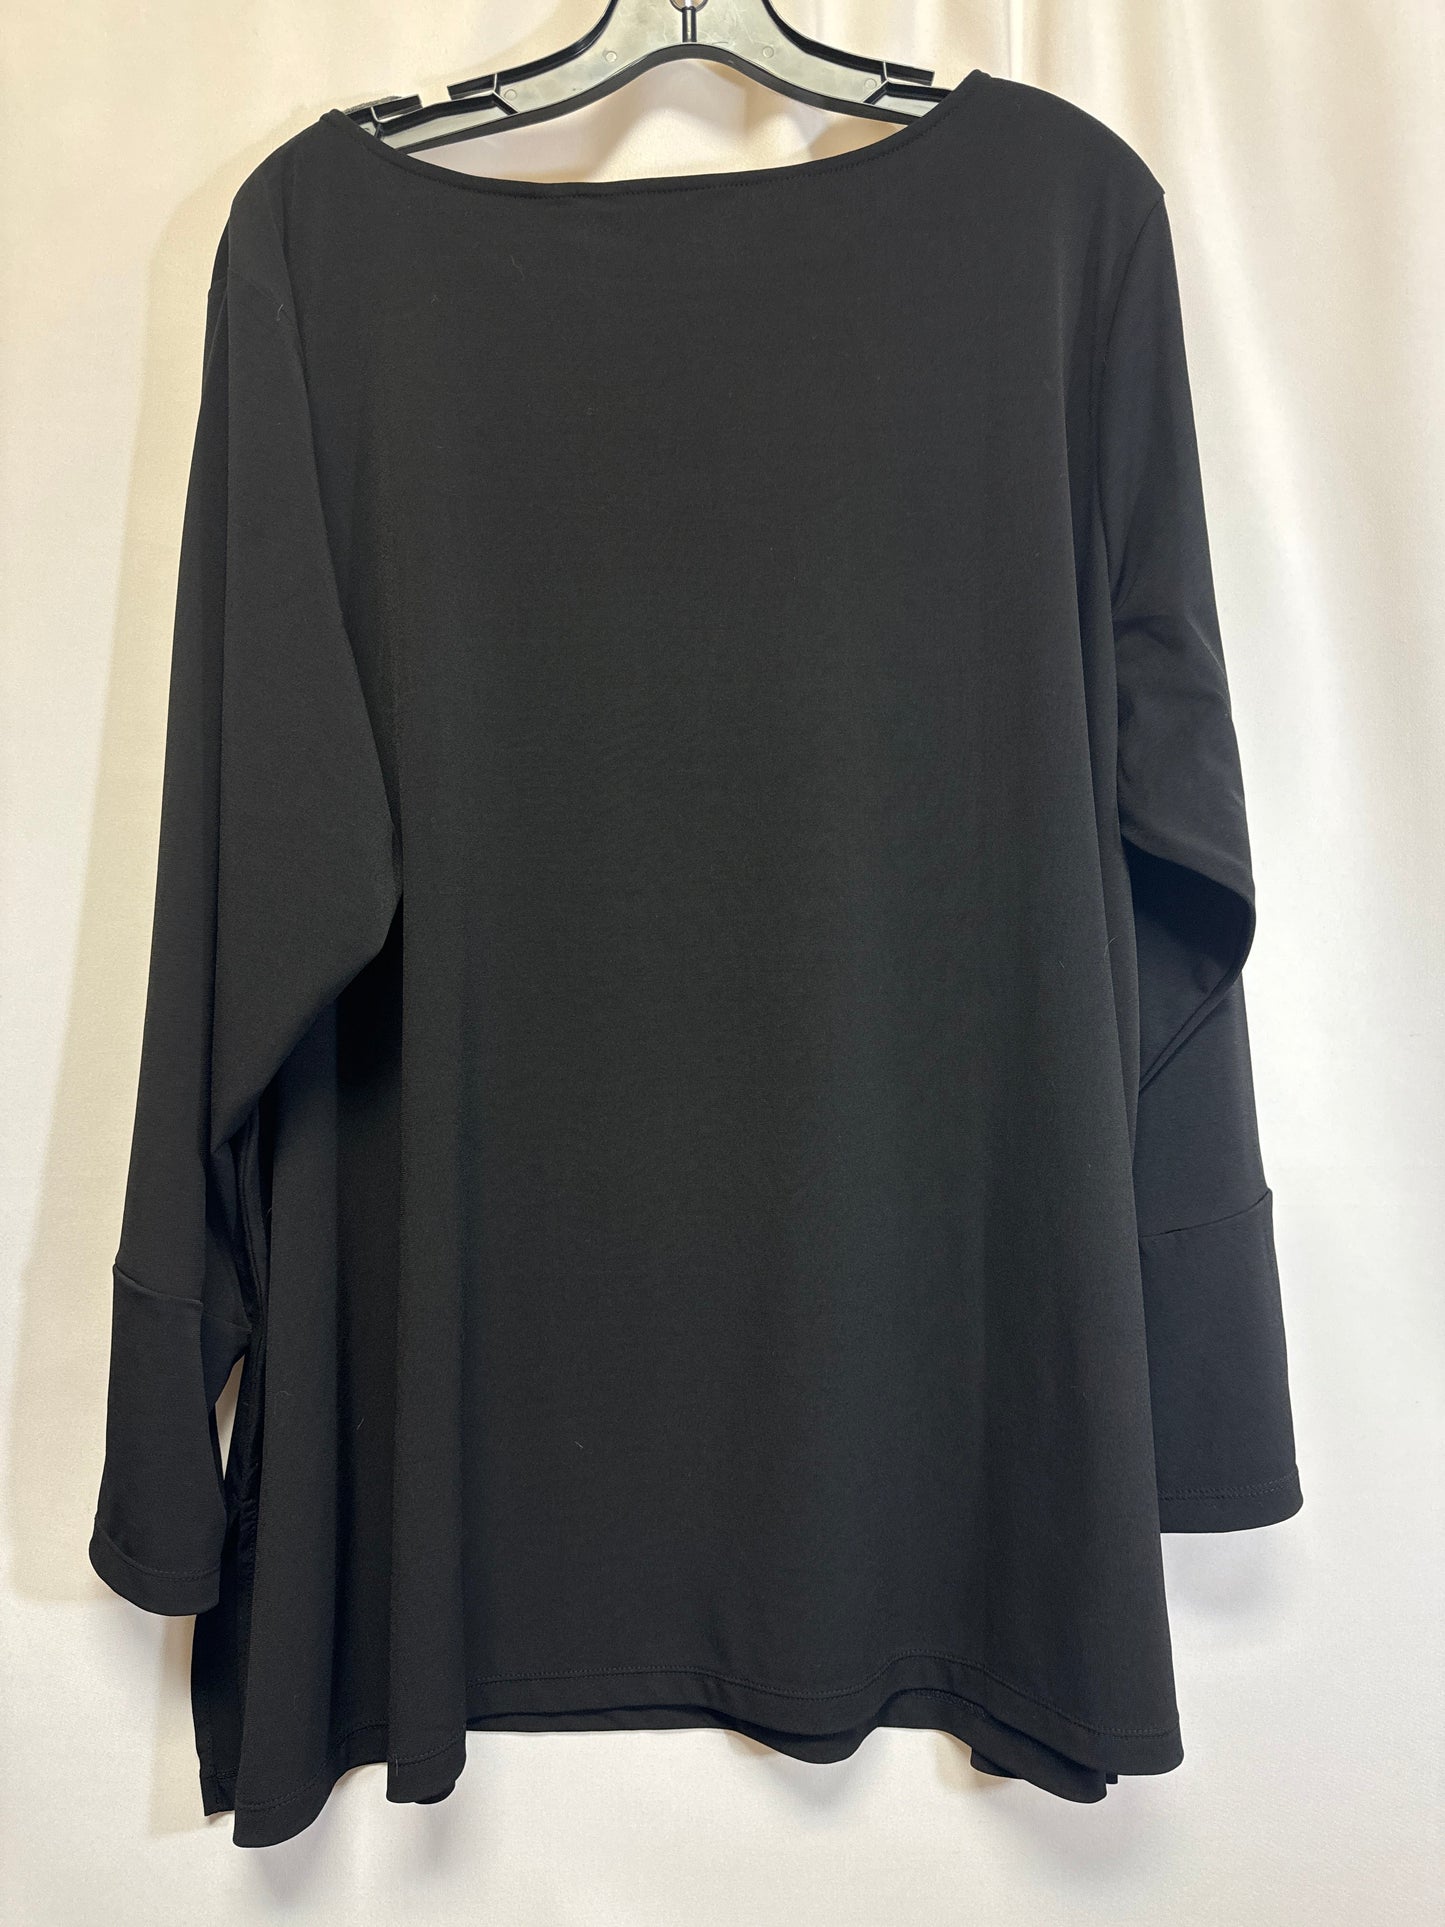 Blue Top Long Sleeve Clothes Mentor, Size 3x